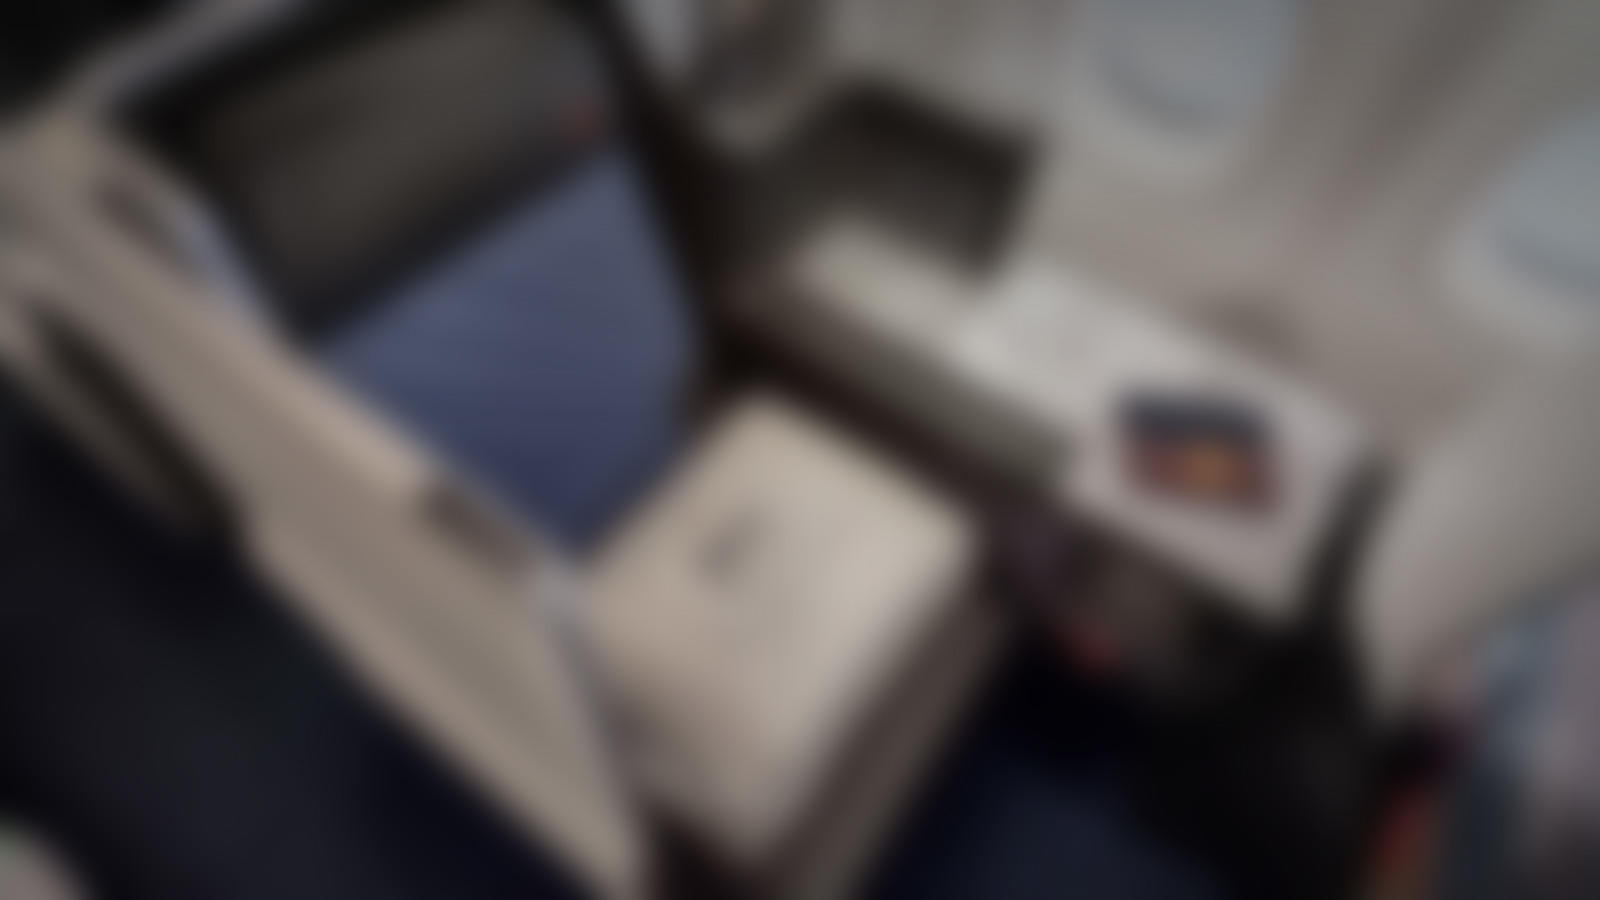 Delta One seat, blurred as image background